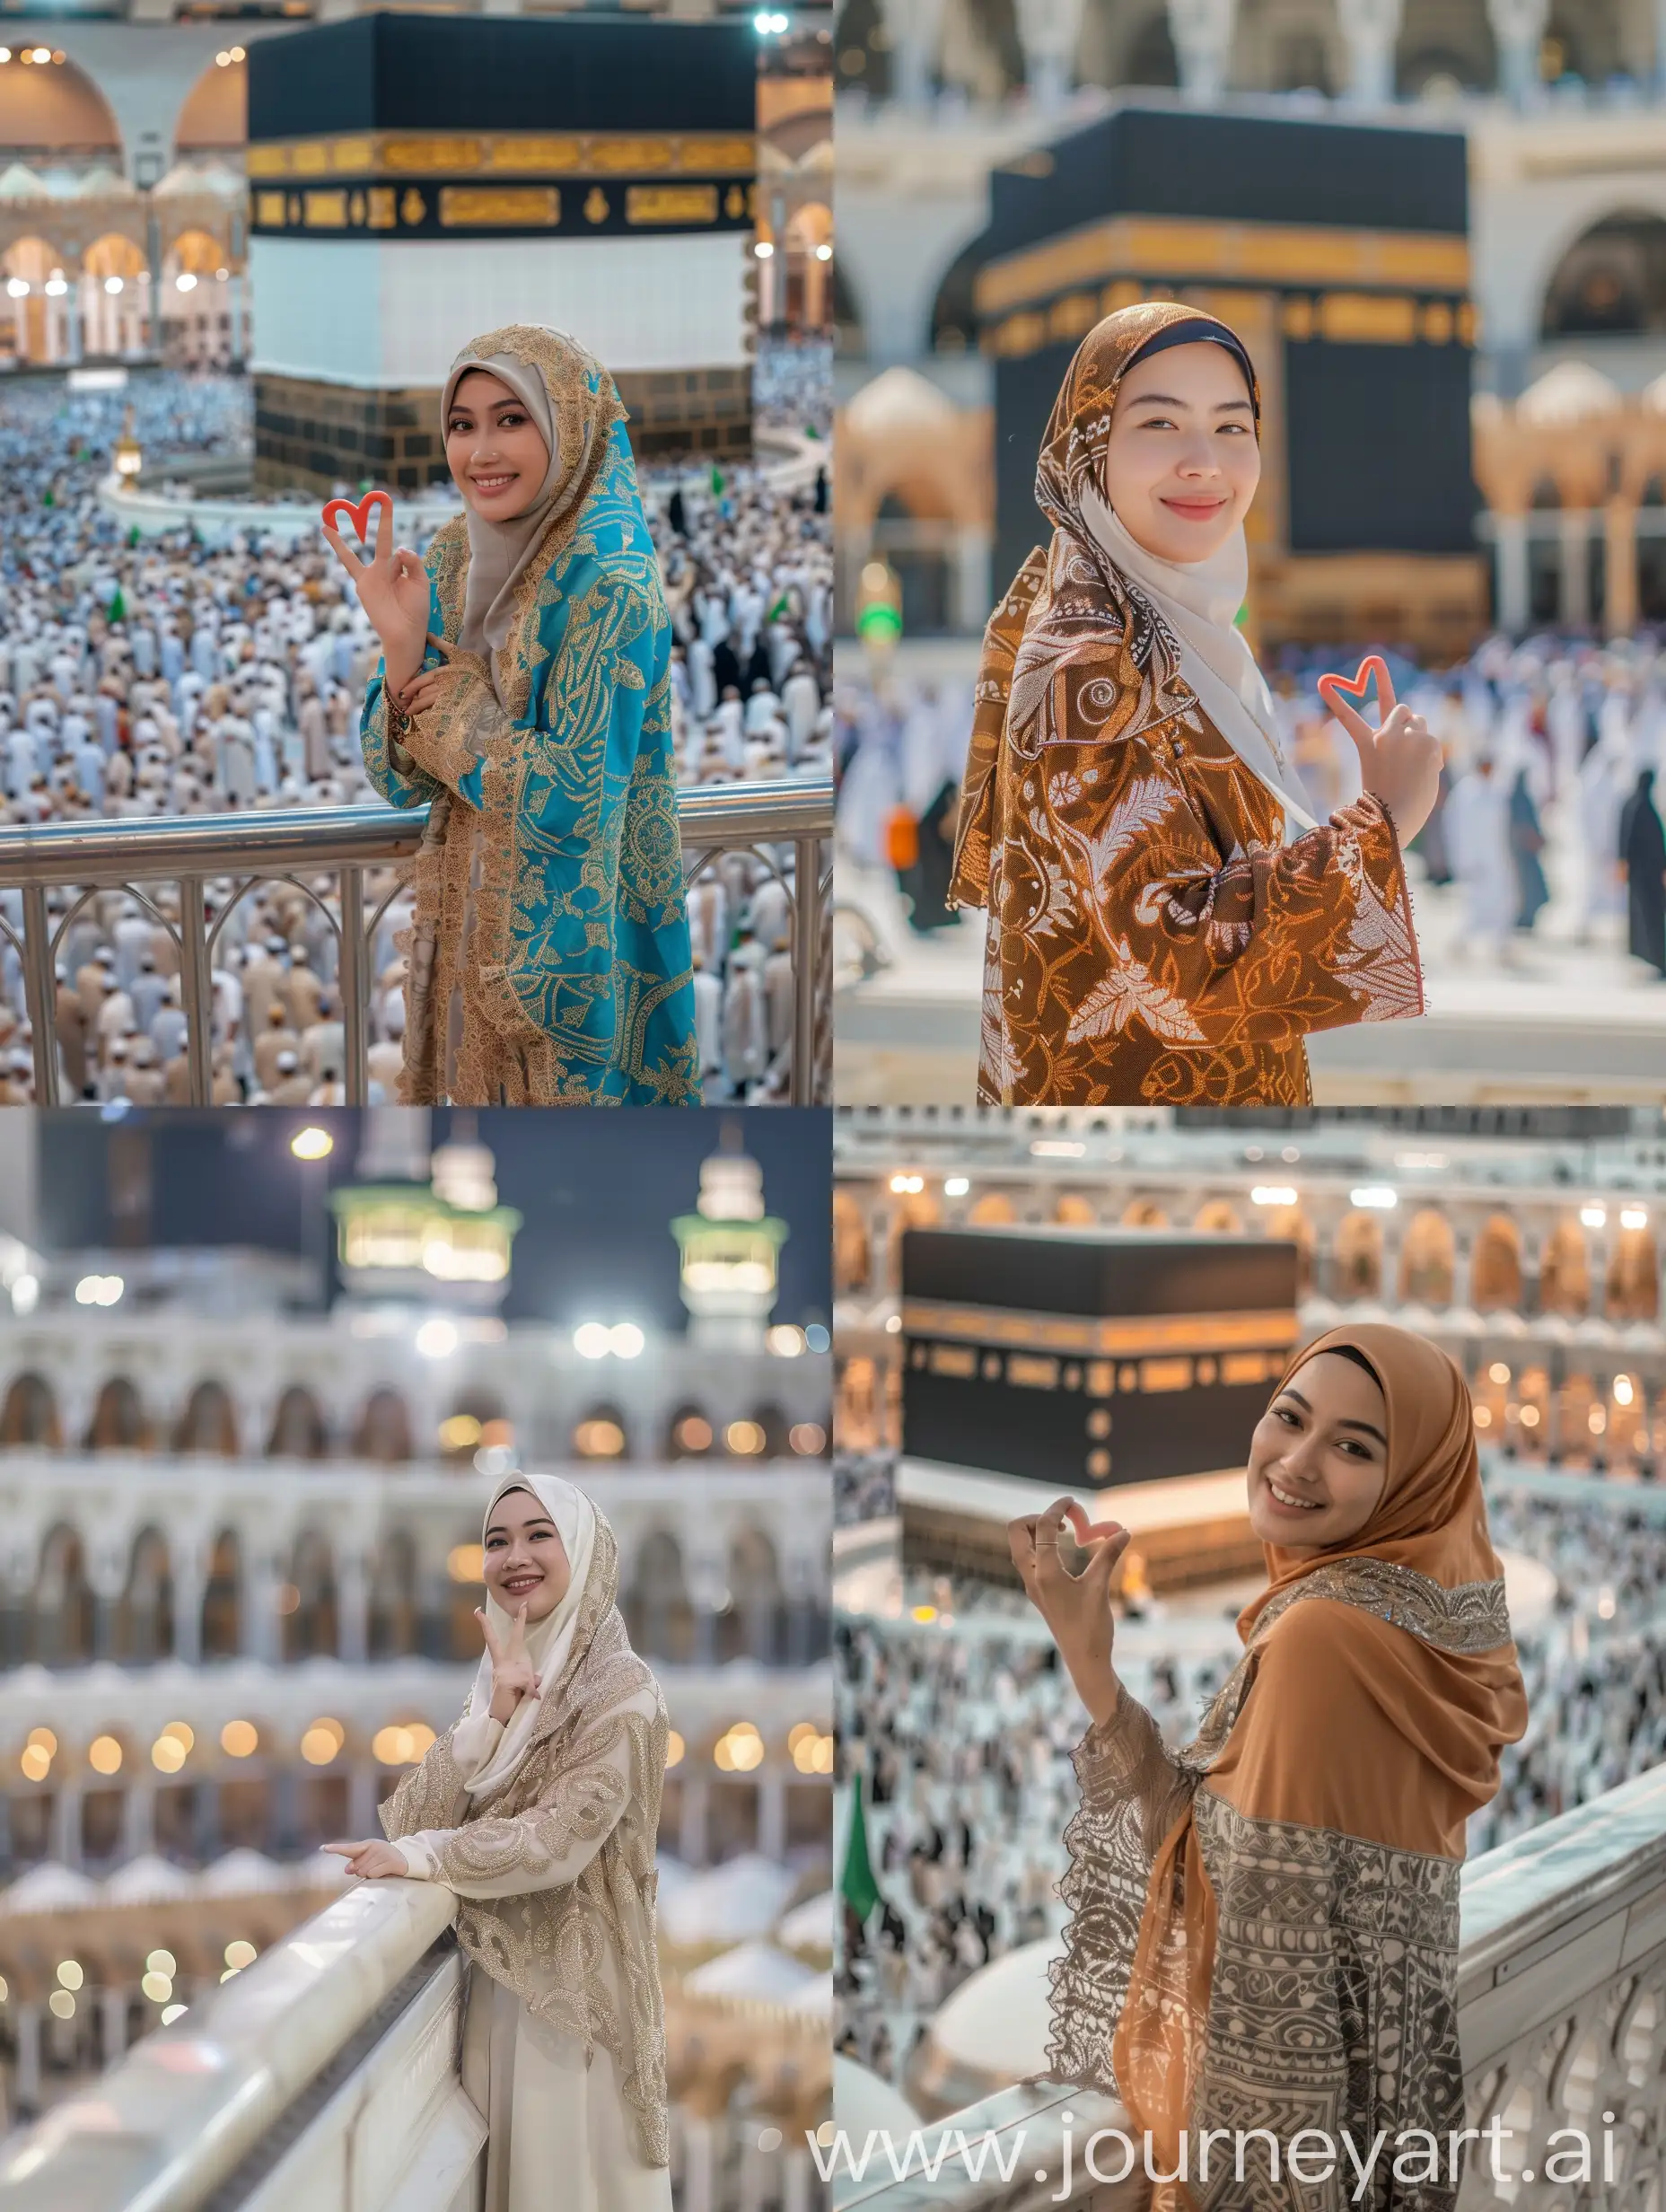 Indonesian woman (moslem) standing posing like a model on the Islamic religious Kaaba, heart sign hand gesture, smiling. 1Girl, Batik cloth, Best Quality, Masterpiece, Ultra High Resolution, (Realisticity:1.4), Original Photo, Cinematic Lighting, POV-shot, Eye-Level-shot.